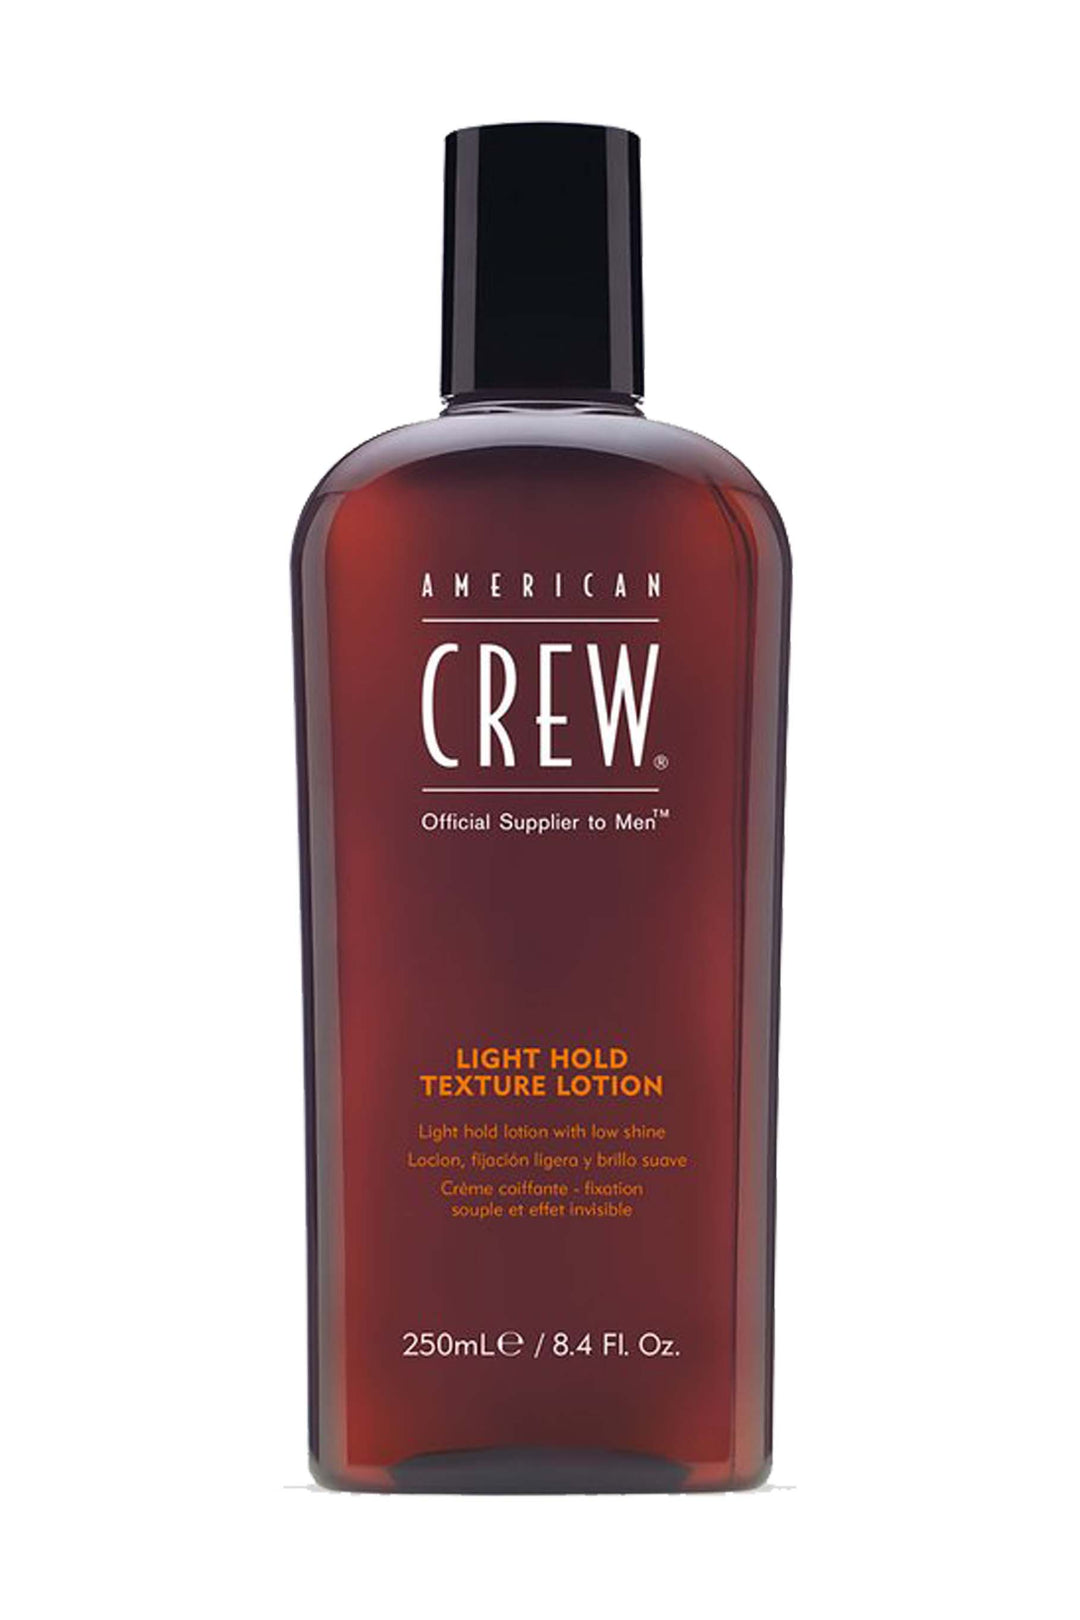 american-crew-light-hold-texture-lotion-250ml